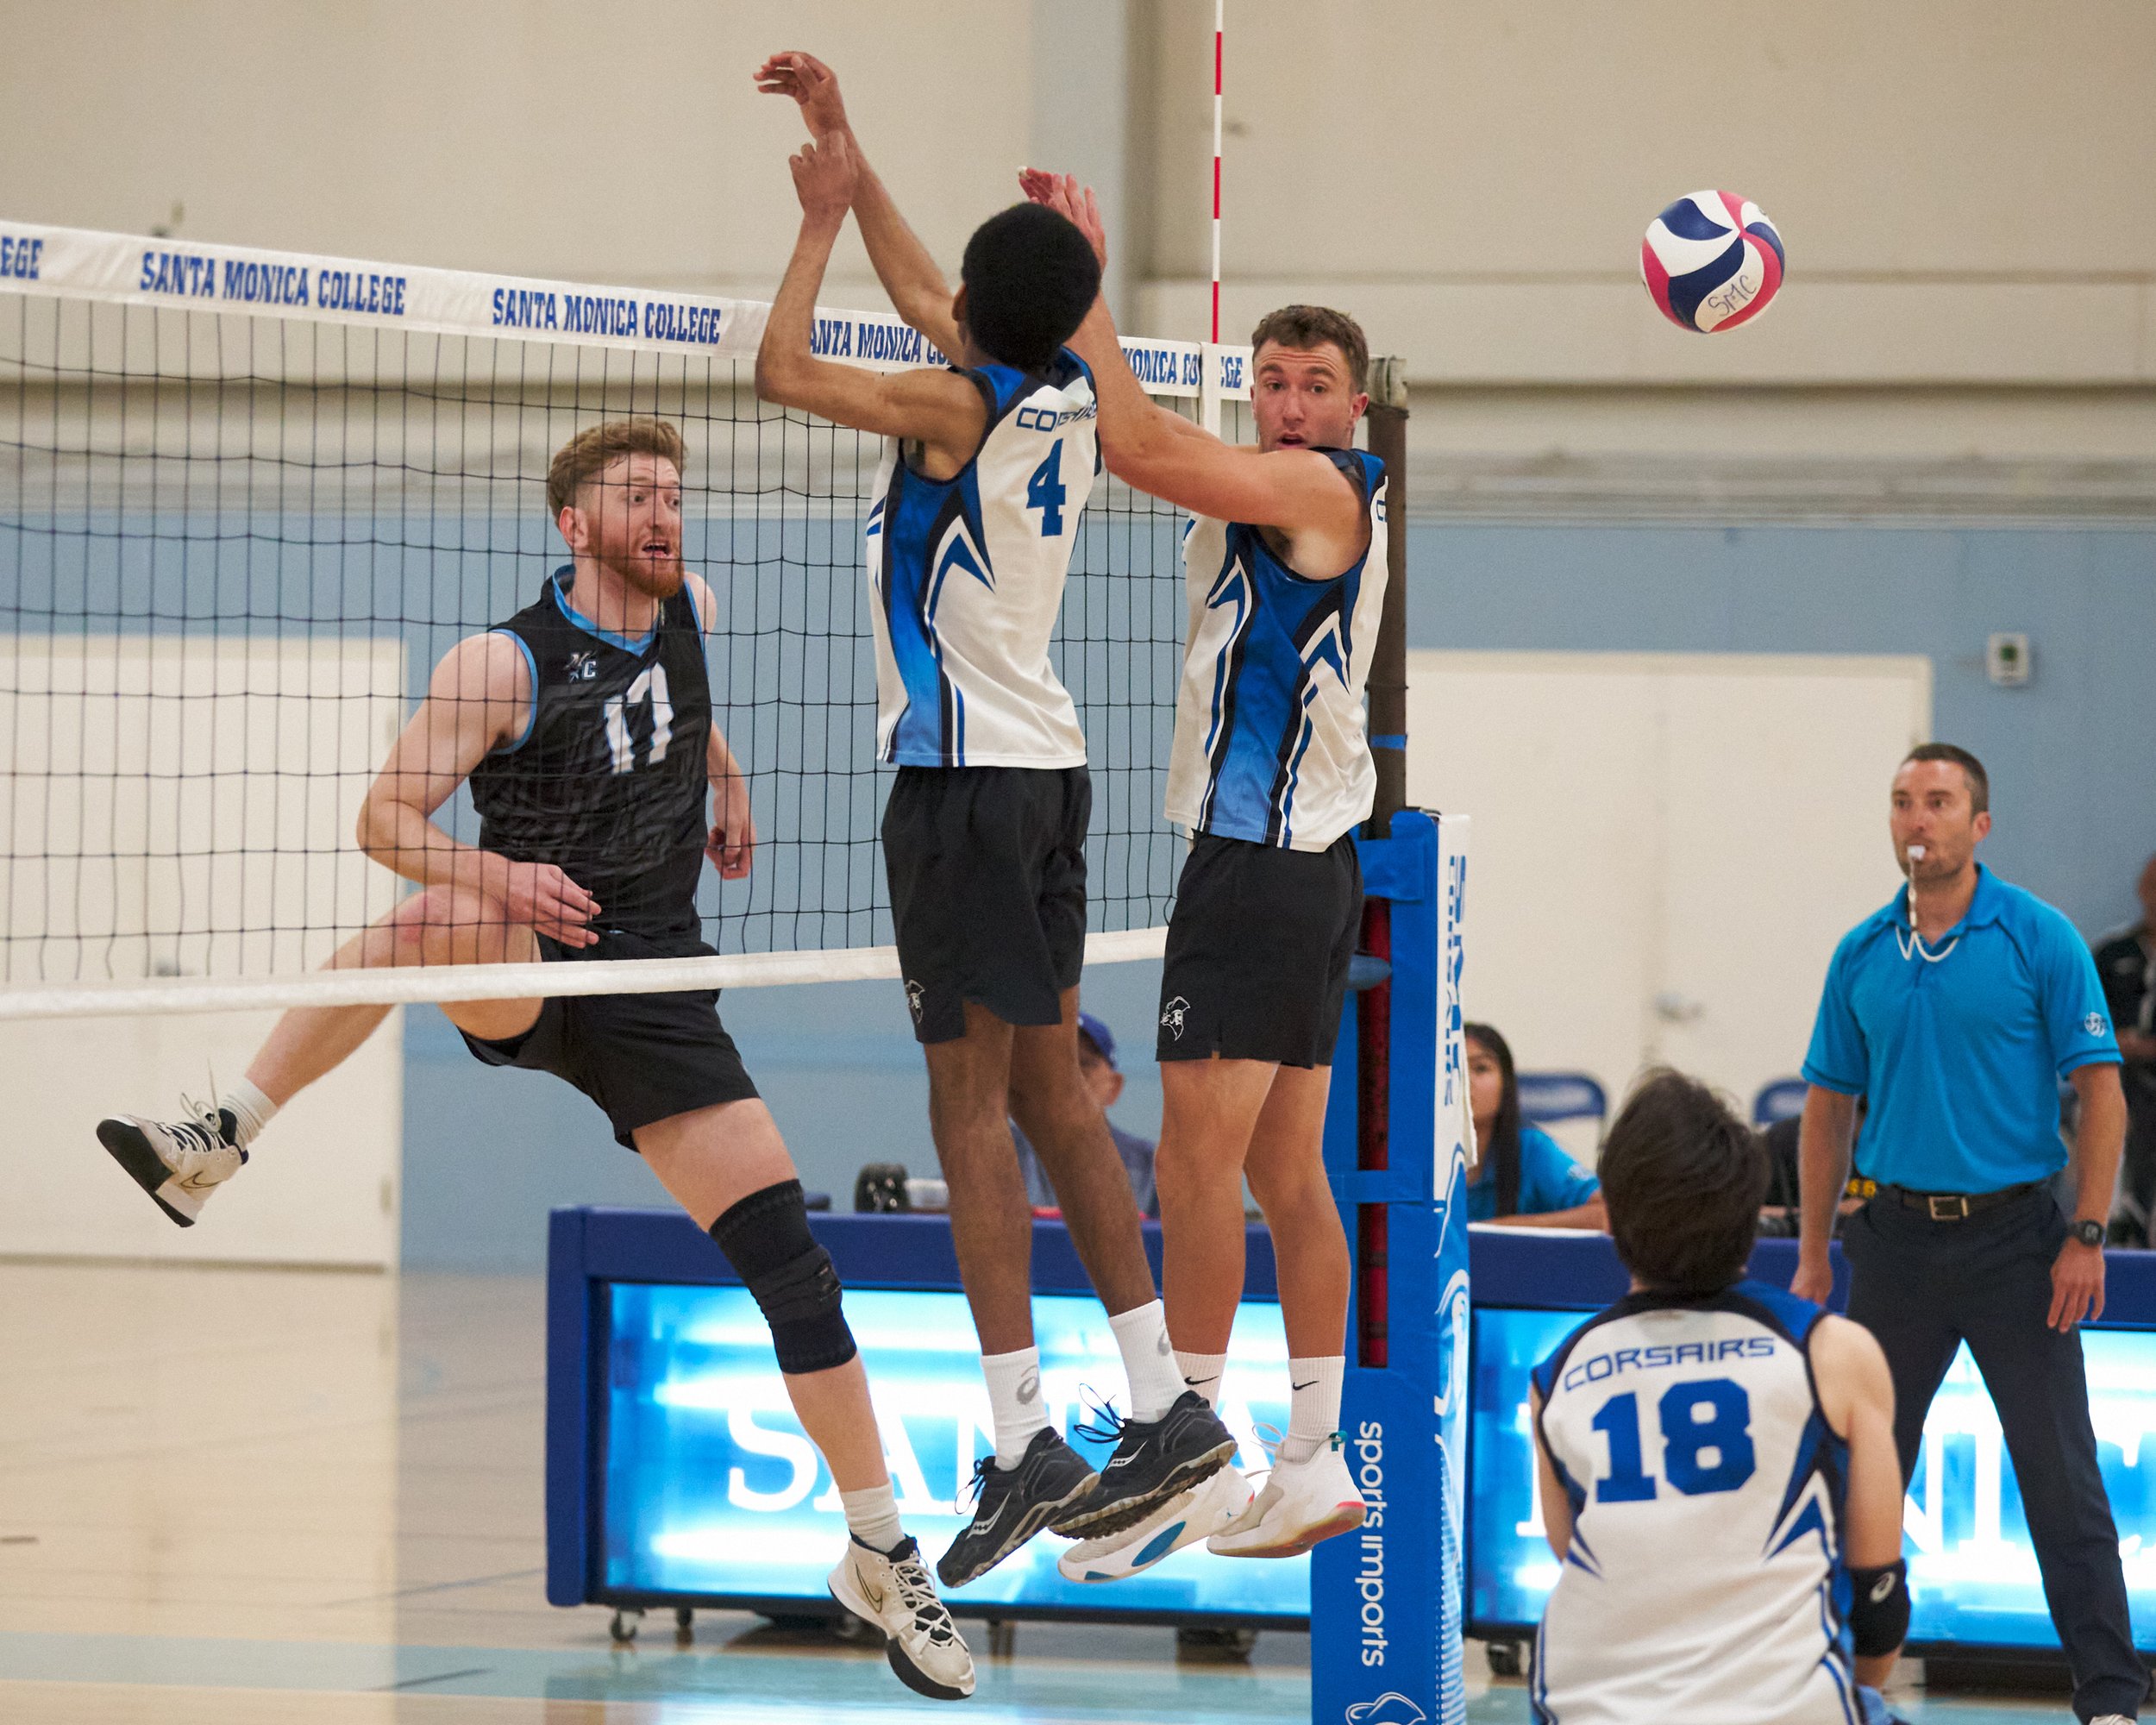  Moorpark College Raiders' Michael Stahl hits the ball past Santa Monica College Corsairs' Beikwaw Yankey and Kane Schwengel during the men's volleyball match on Wednesday, April 12, 2023, at Corsair Gym in Santa Monica, Calif. The Corsairs lost 3-0.